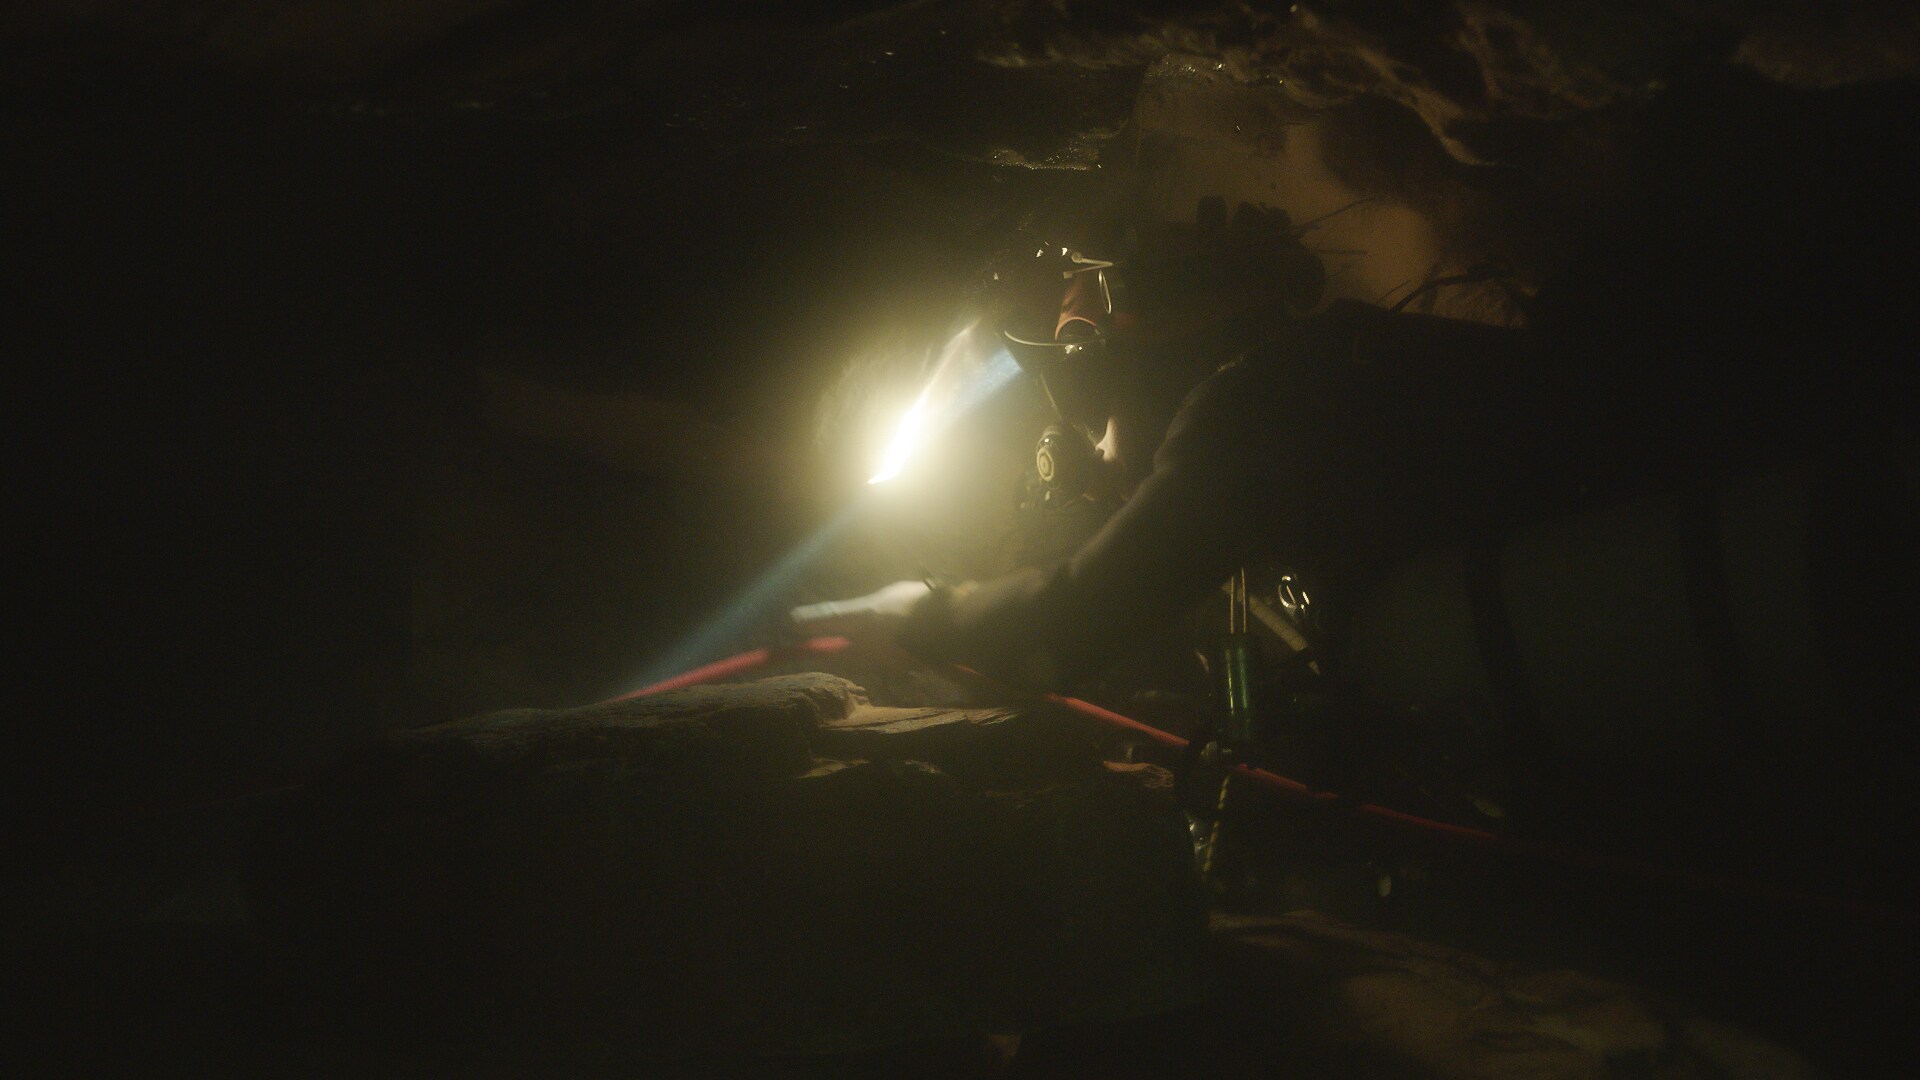 A diver swims through a dark cave guided by a headlamp.  THE RESCUE chronicles the 2018 rescue of 12 Thai boys and their soccer coach, trapped deep inside a flooded cave. E. Chai Vasarhelyi and Jimmy Chin reveal the perilous world of cave diving, bravery of the rescuers, and dedication of a community that made great sacrifices to save these young boys. (Credit: National Geographic)